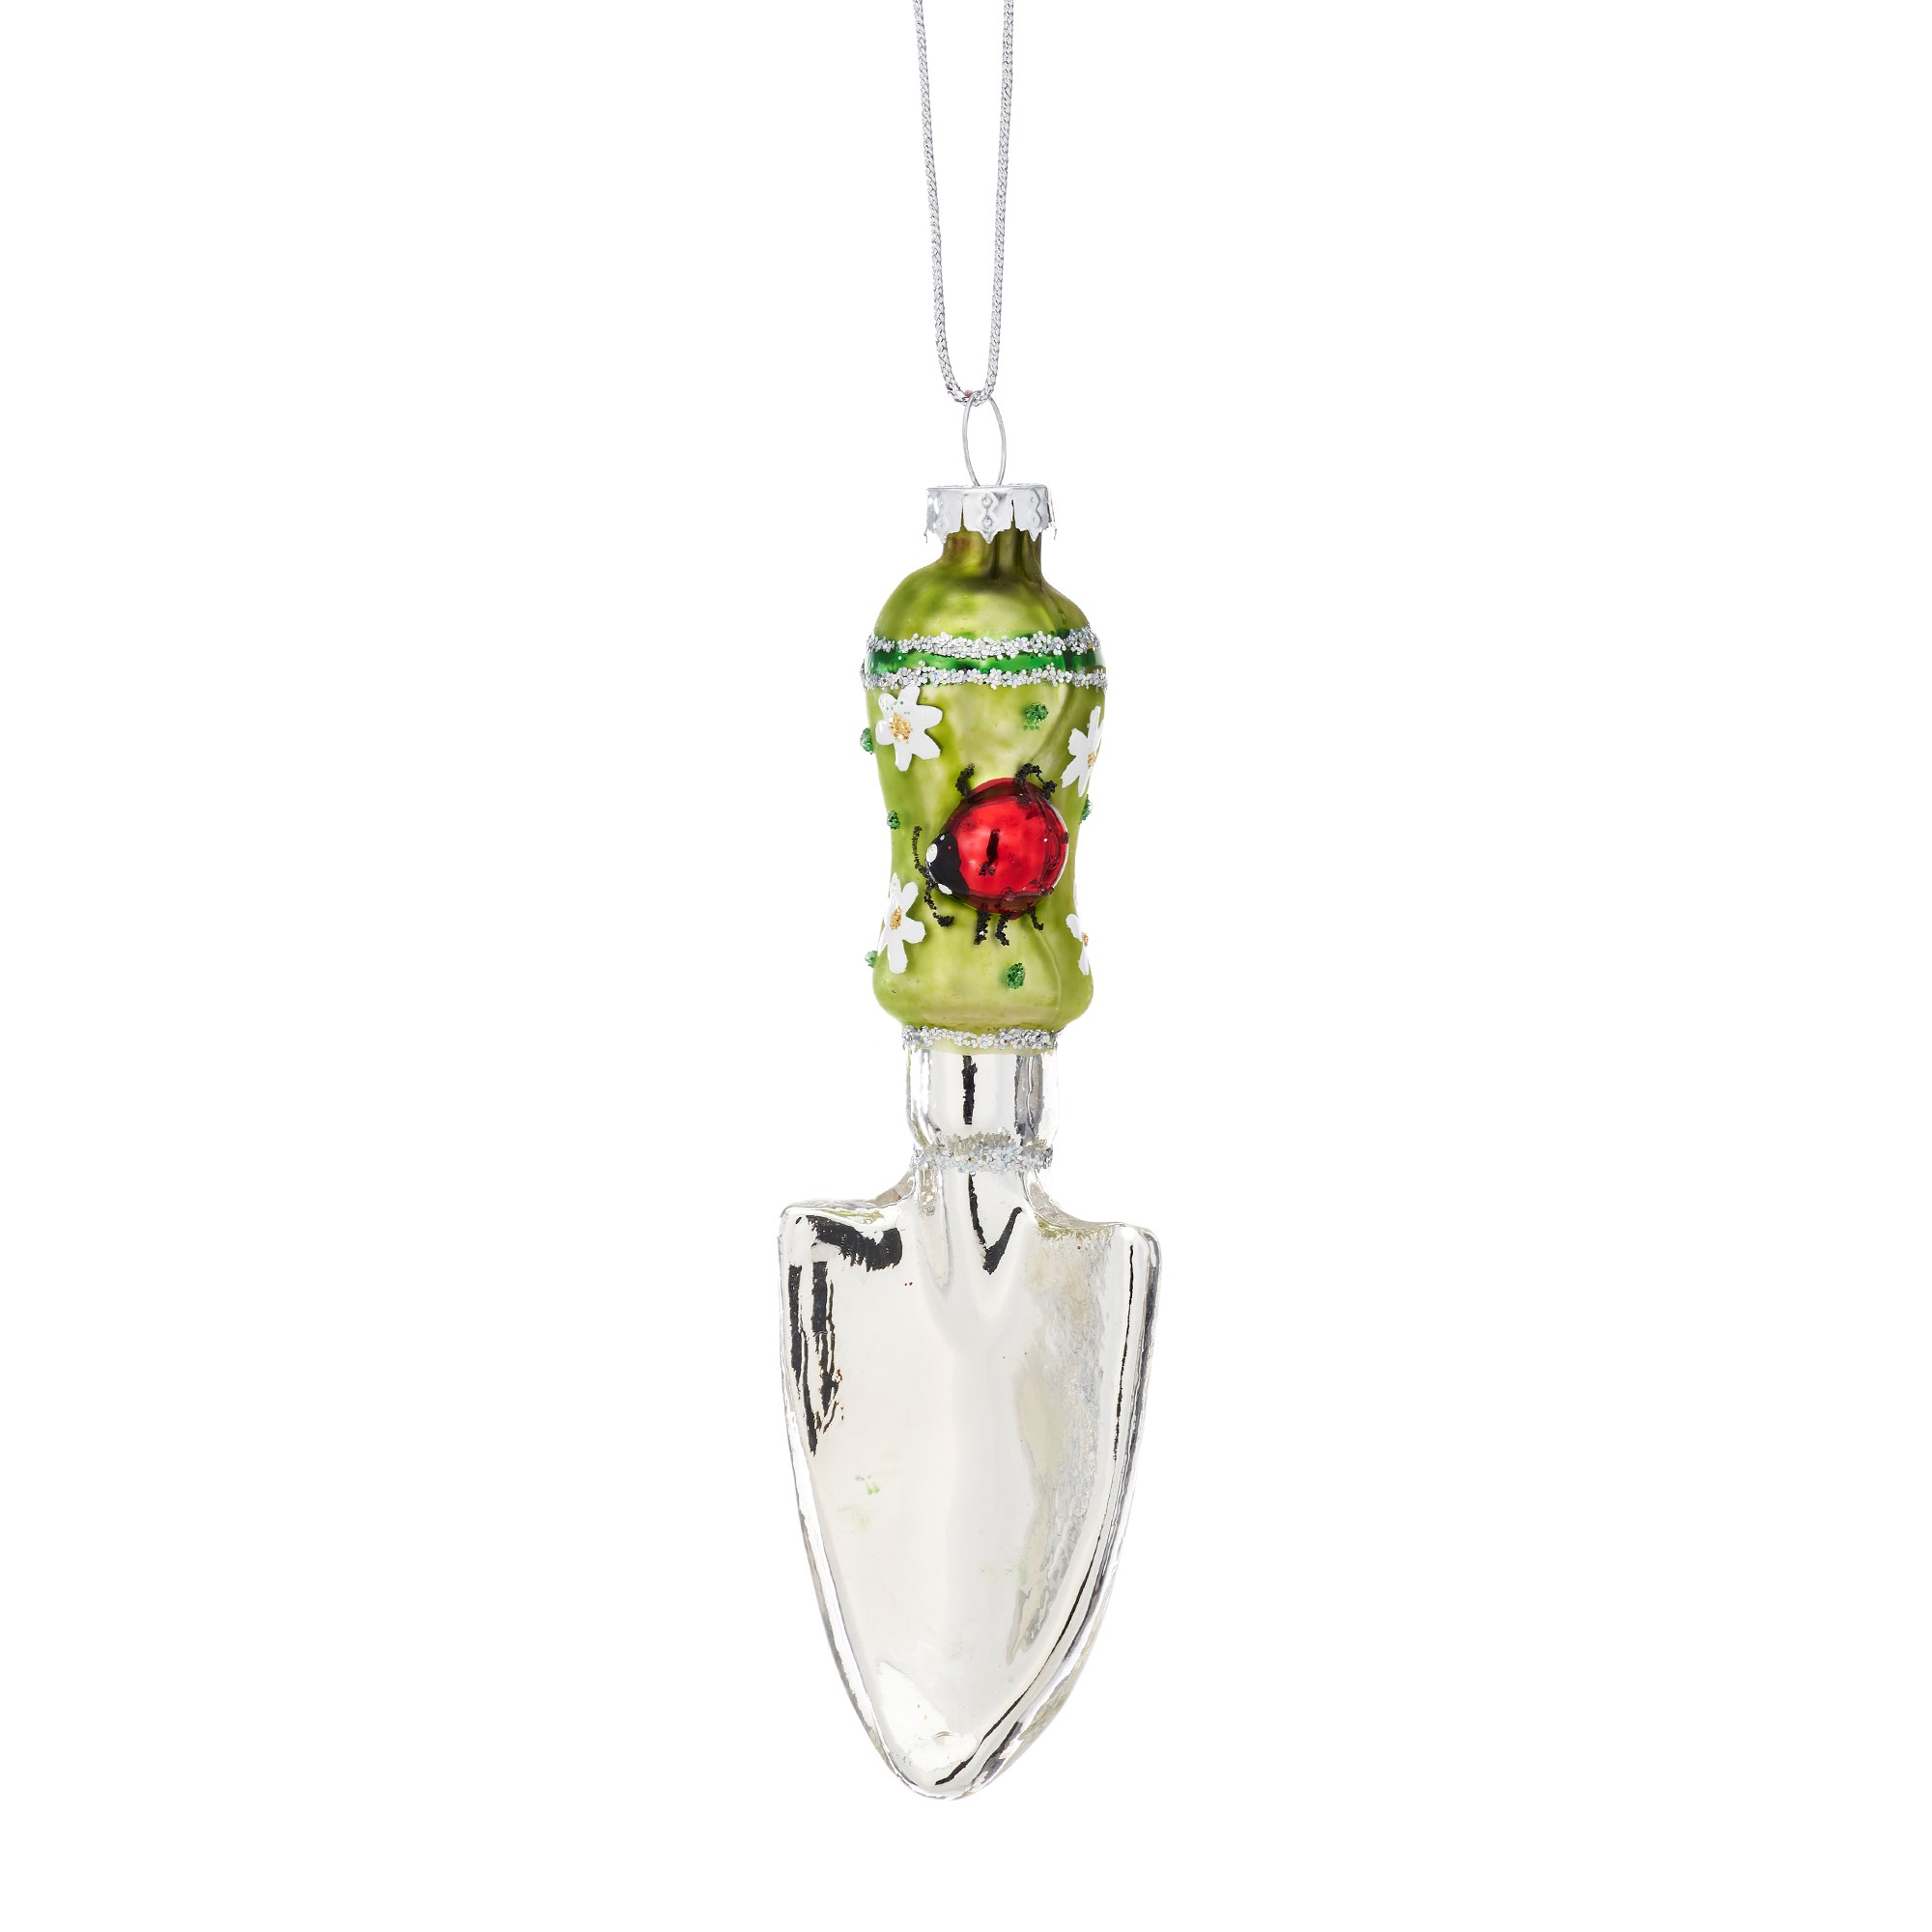 Sass & Belle Silver and Green Gardening Spade Hanging Decoration